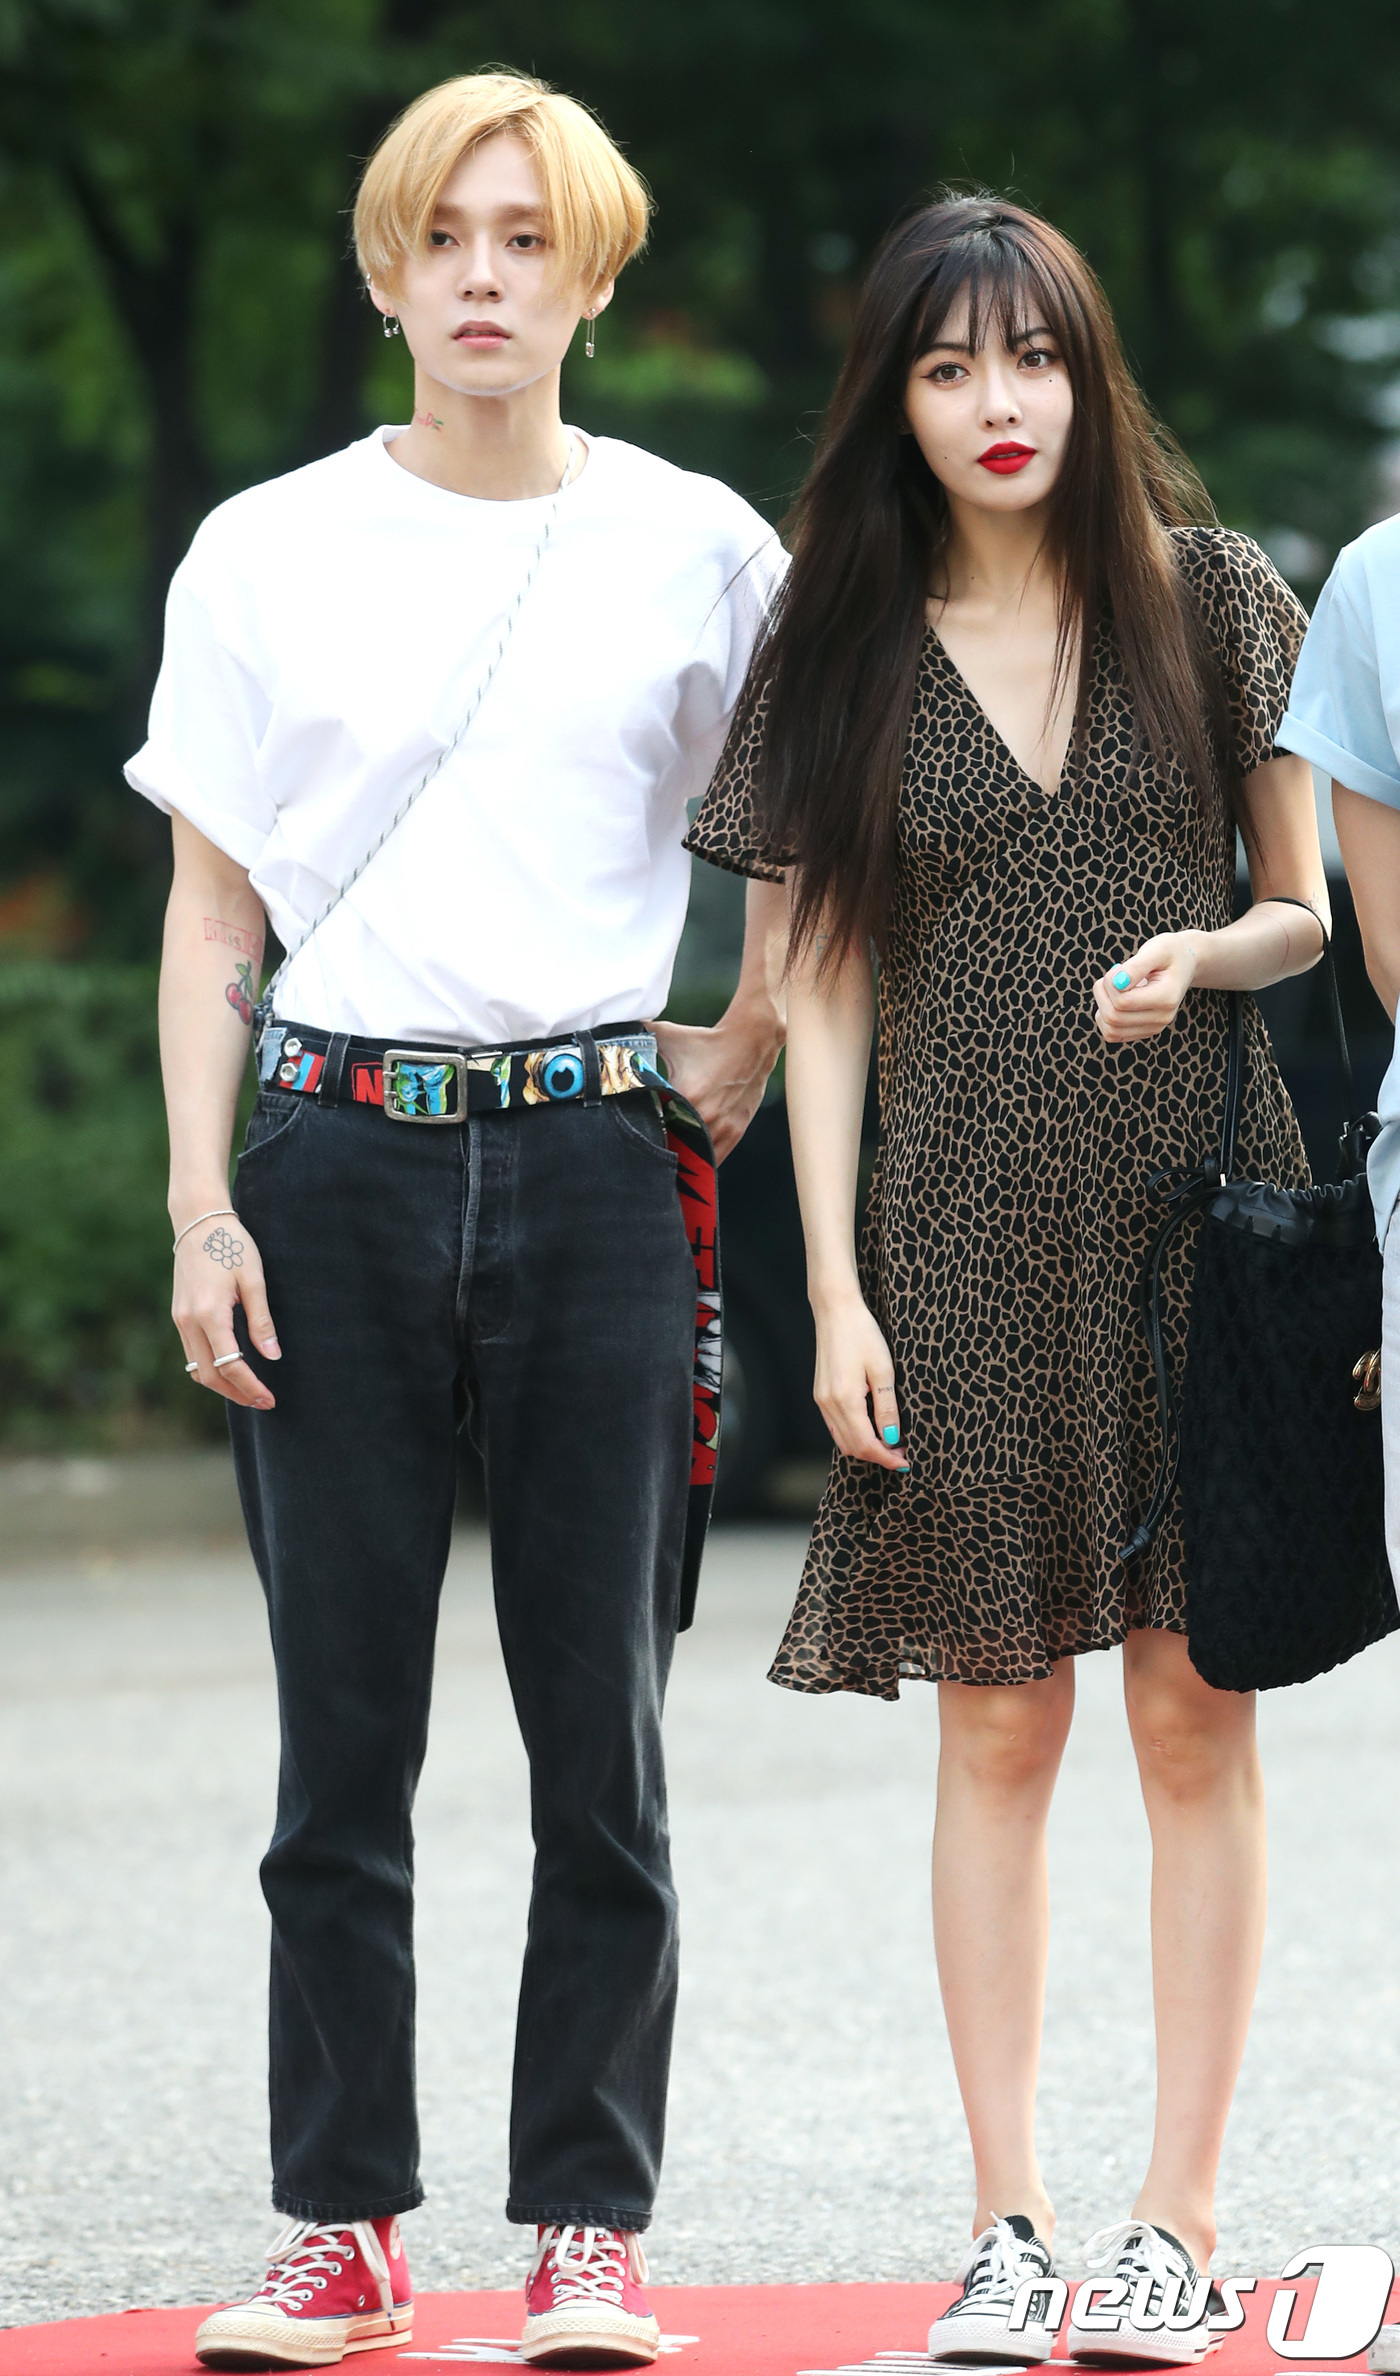 Seoul=) = Triple H DAWN, Hyona (right) greets the station as they enter the station to perform KBS2 Music Bank (Muvin) revival at KBS in Yeouido, Seoul on the morning of the 3rd.August 3, 2018.